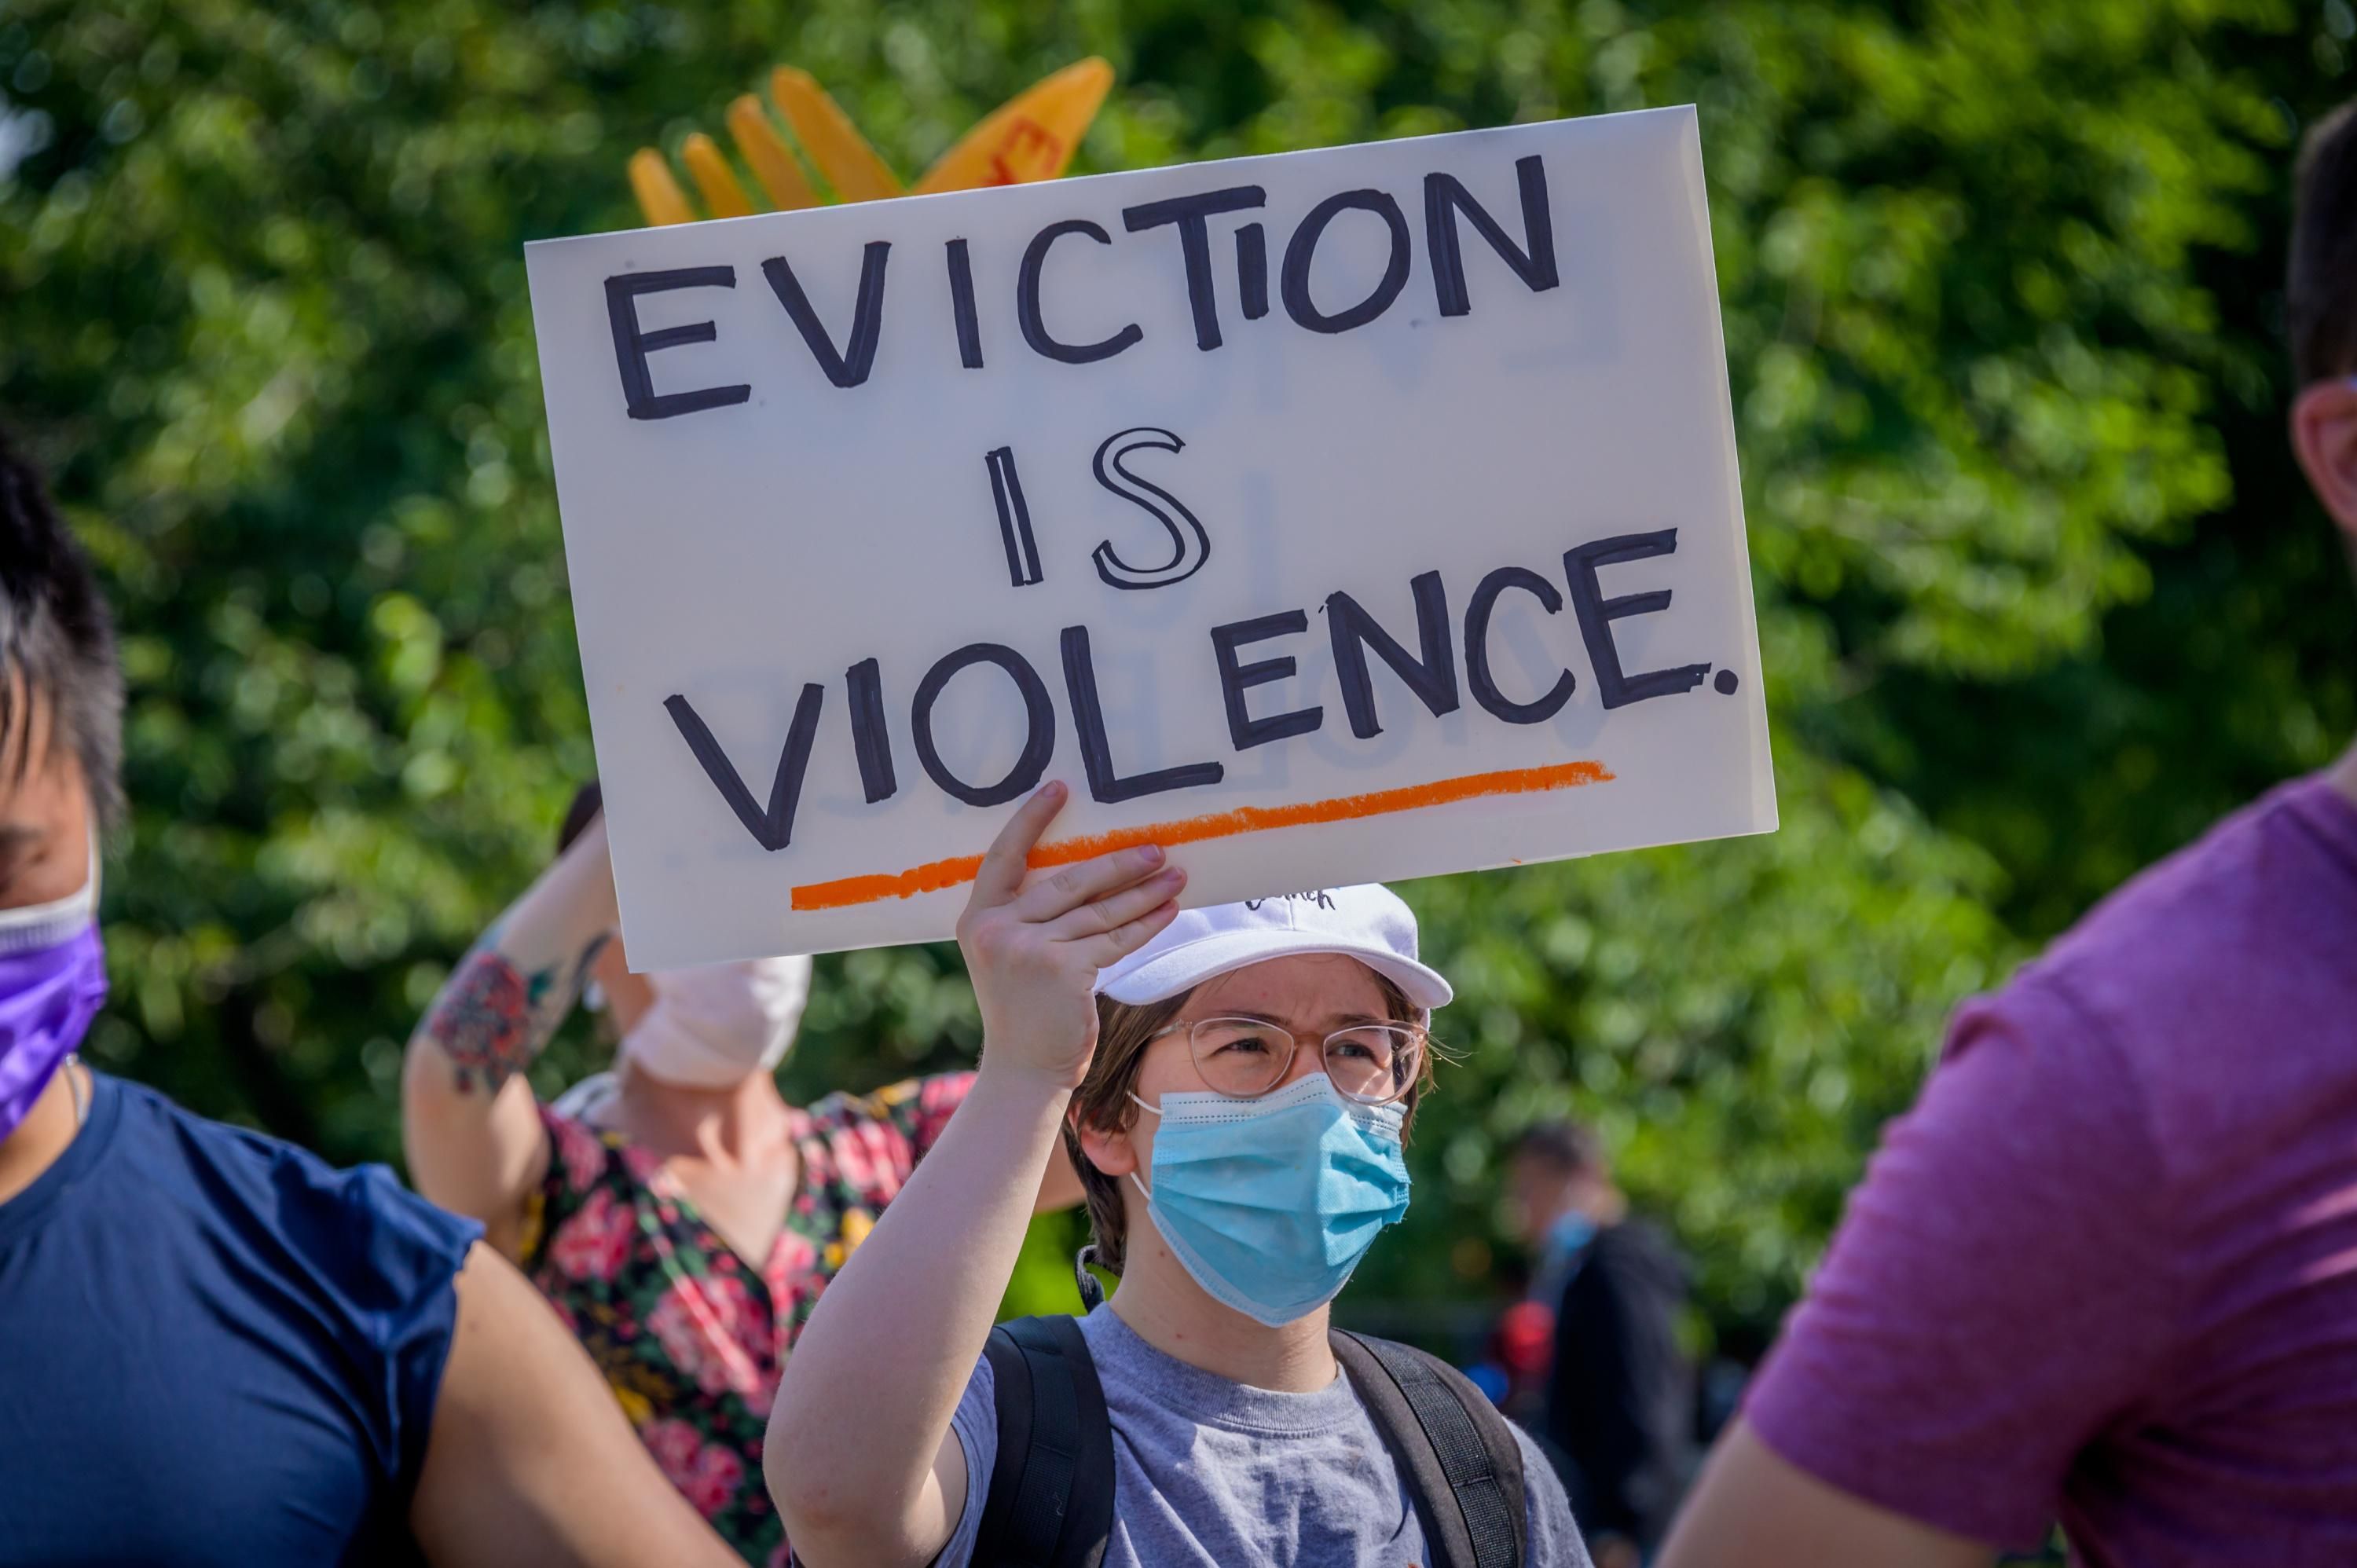 Eviction is Violence sign